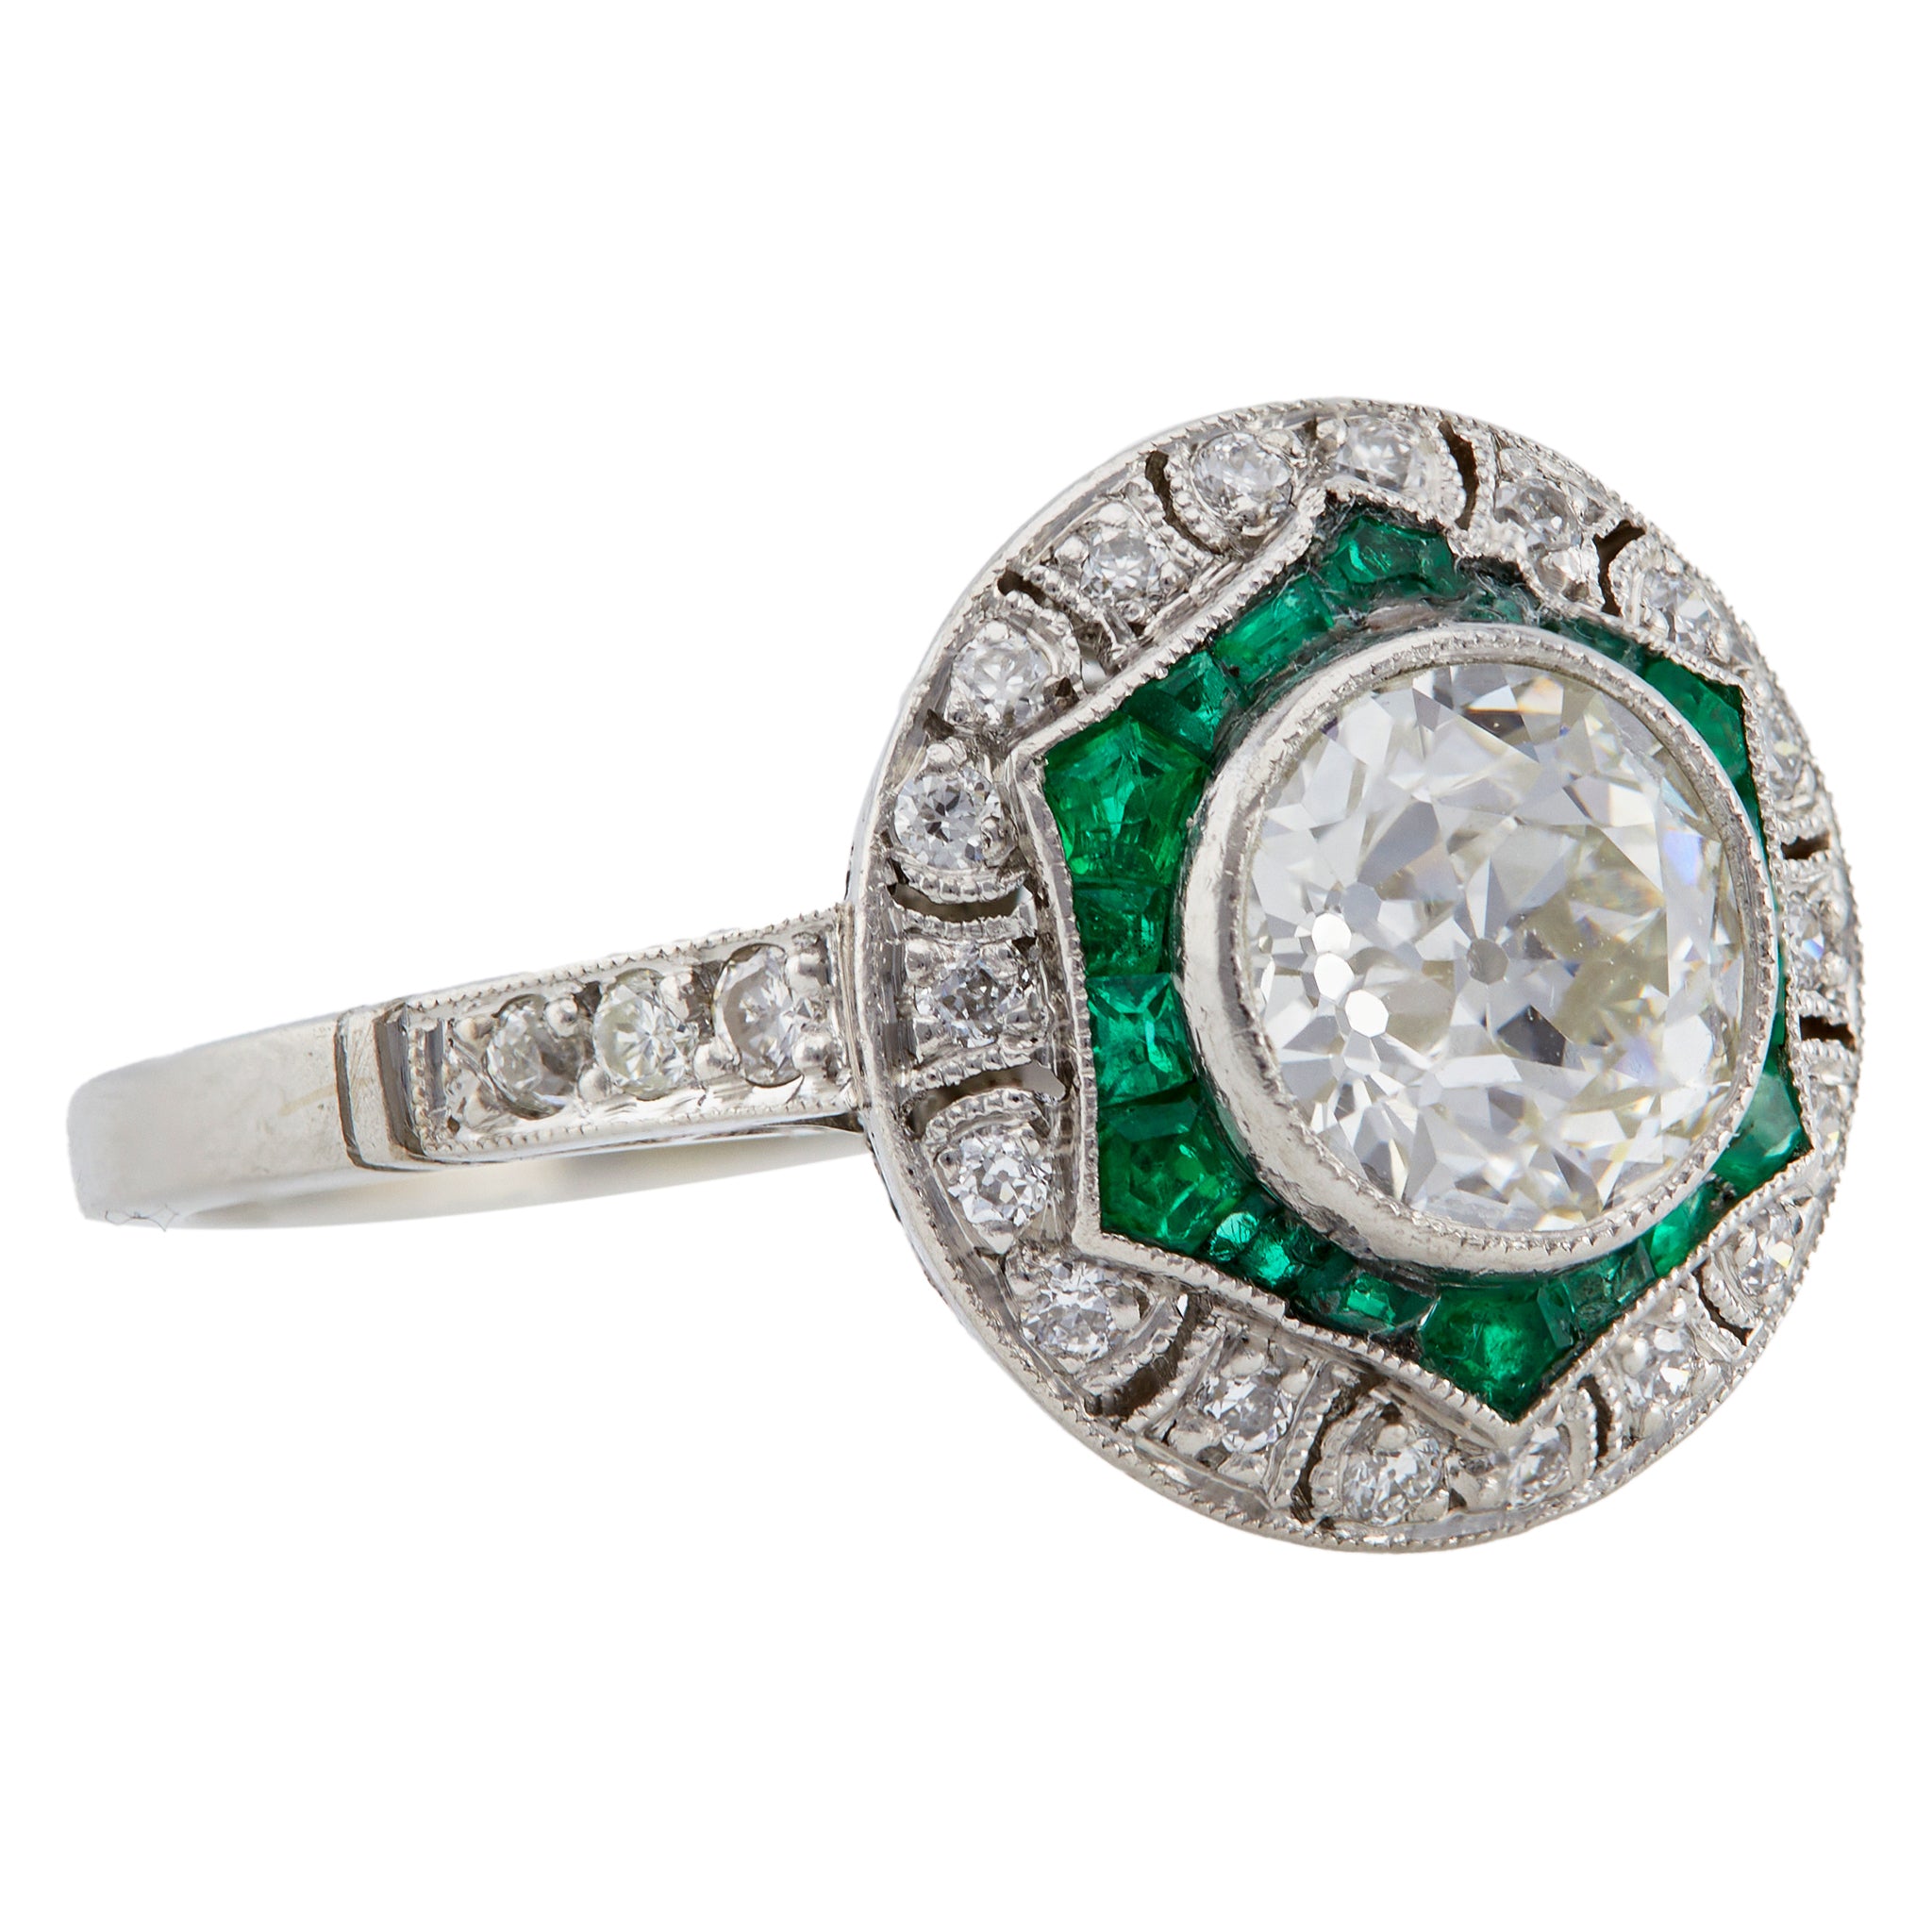 Art Deco Inspired 1.13 Carat Old European Cut Diamond and Emerald Platinum Ring Rings Jack Weir & Sons   